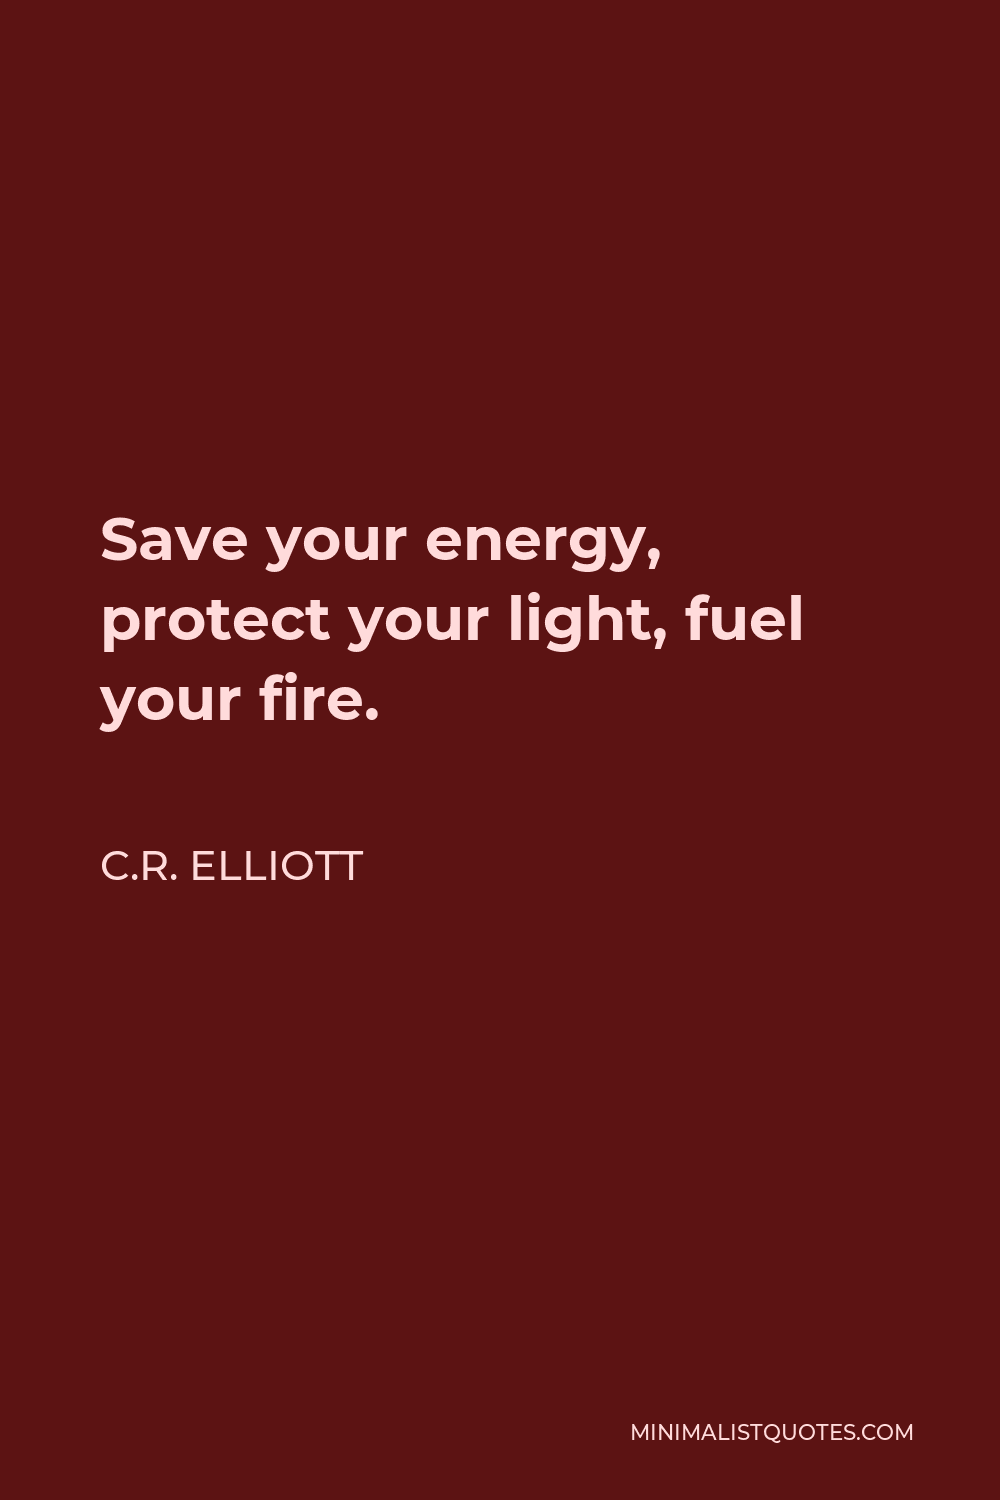 C.R. Elliott Quote - Save your energy, protect your light, fuel your fire.